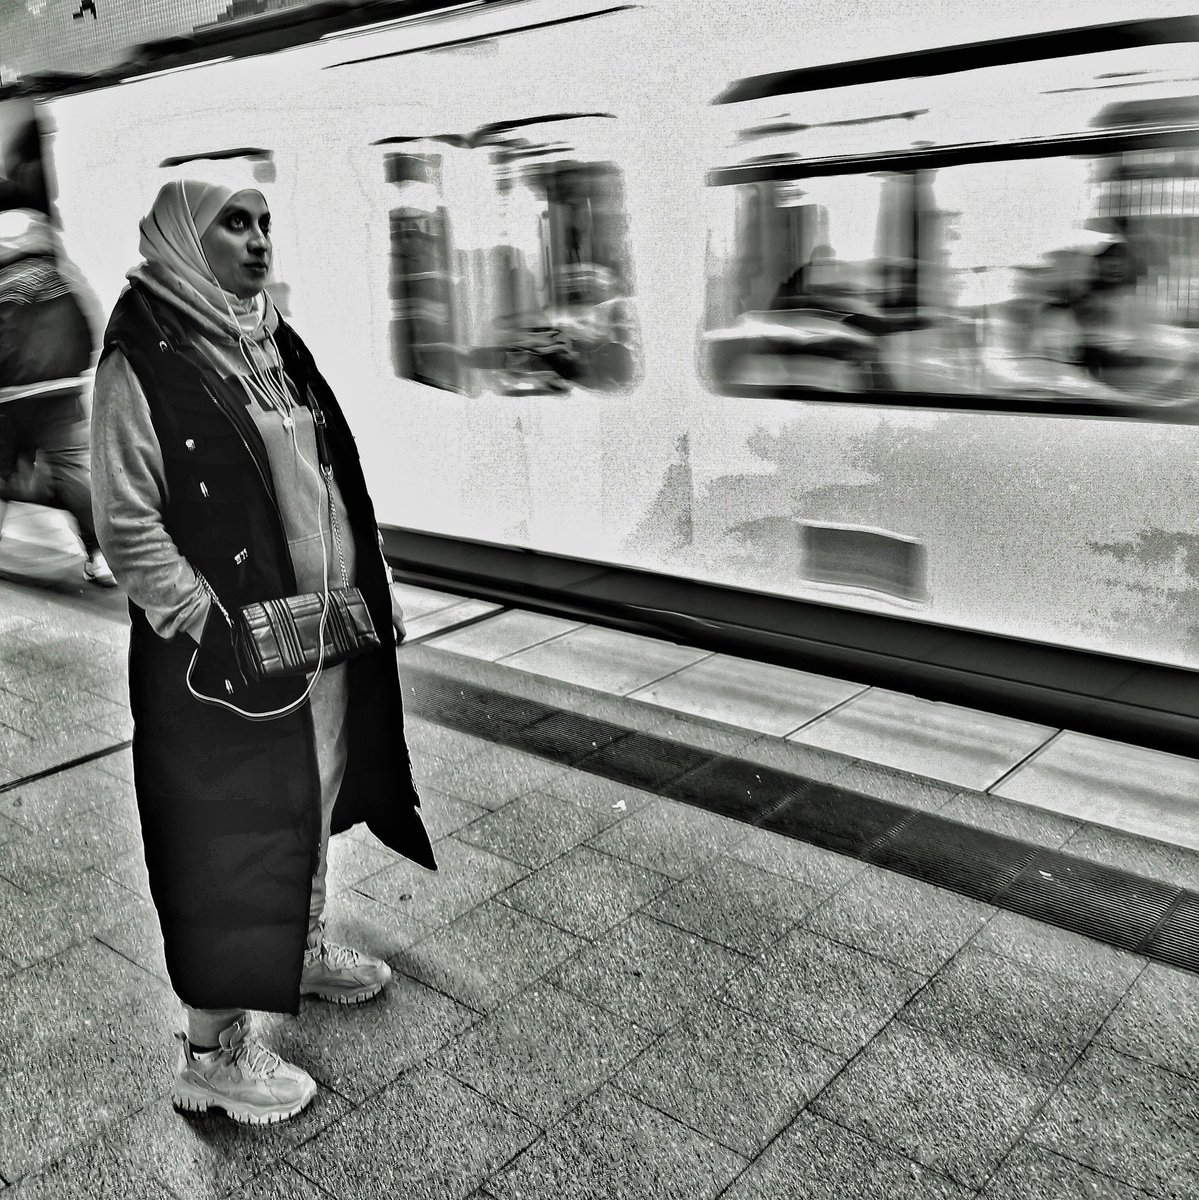 Time rushes by

@ap_magazine 
#streetphotographer
#streetphotography
#streetphotographyinternational 
#blackandwhitephotography
#blackandwhitephoto
#blackandwhitestreetphotography 
#monochrome 
#urbanphotography 
#bnwphotography
#bnw
#mobilephotography
#subway
#prettywoman